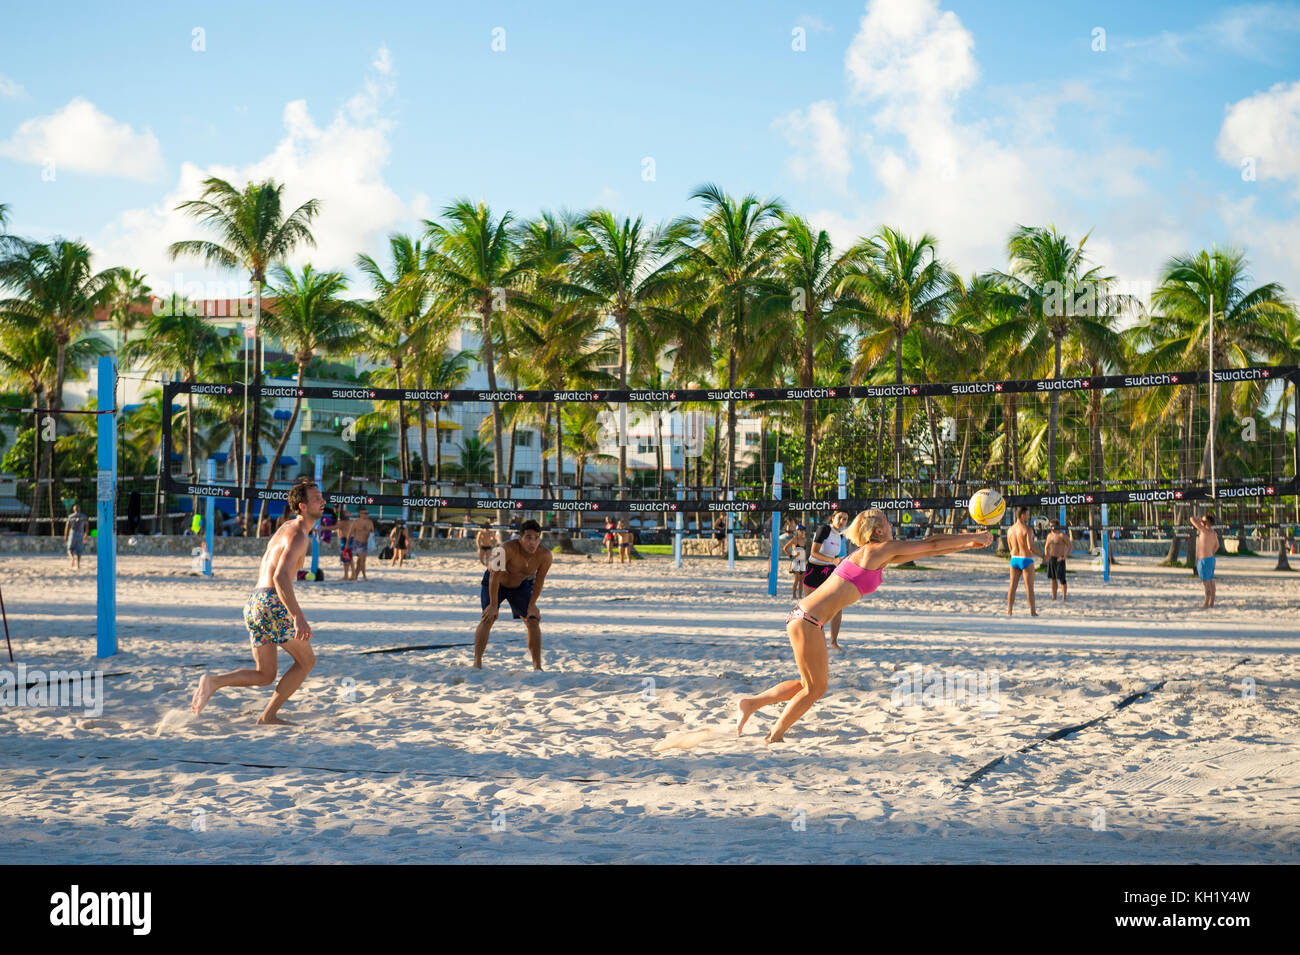 MIAMI - August 31, 2017: Athletic woman digs out a serve while playing volleyball on the Miami Beach promenade with backdrop of iconic art-deco buildi Stock Photo